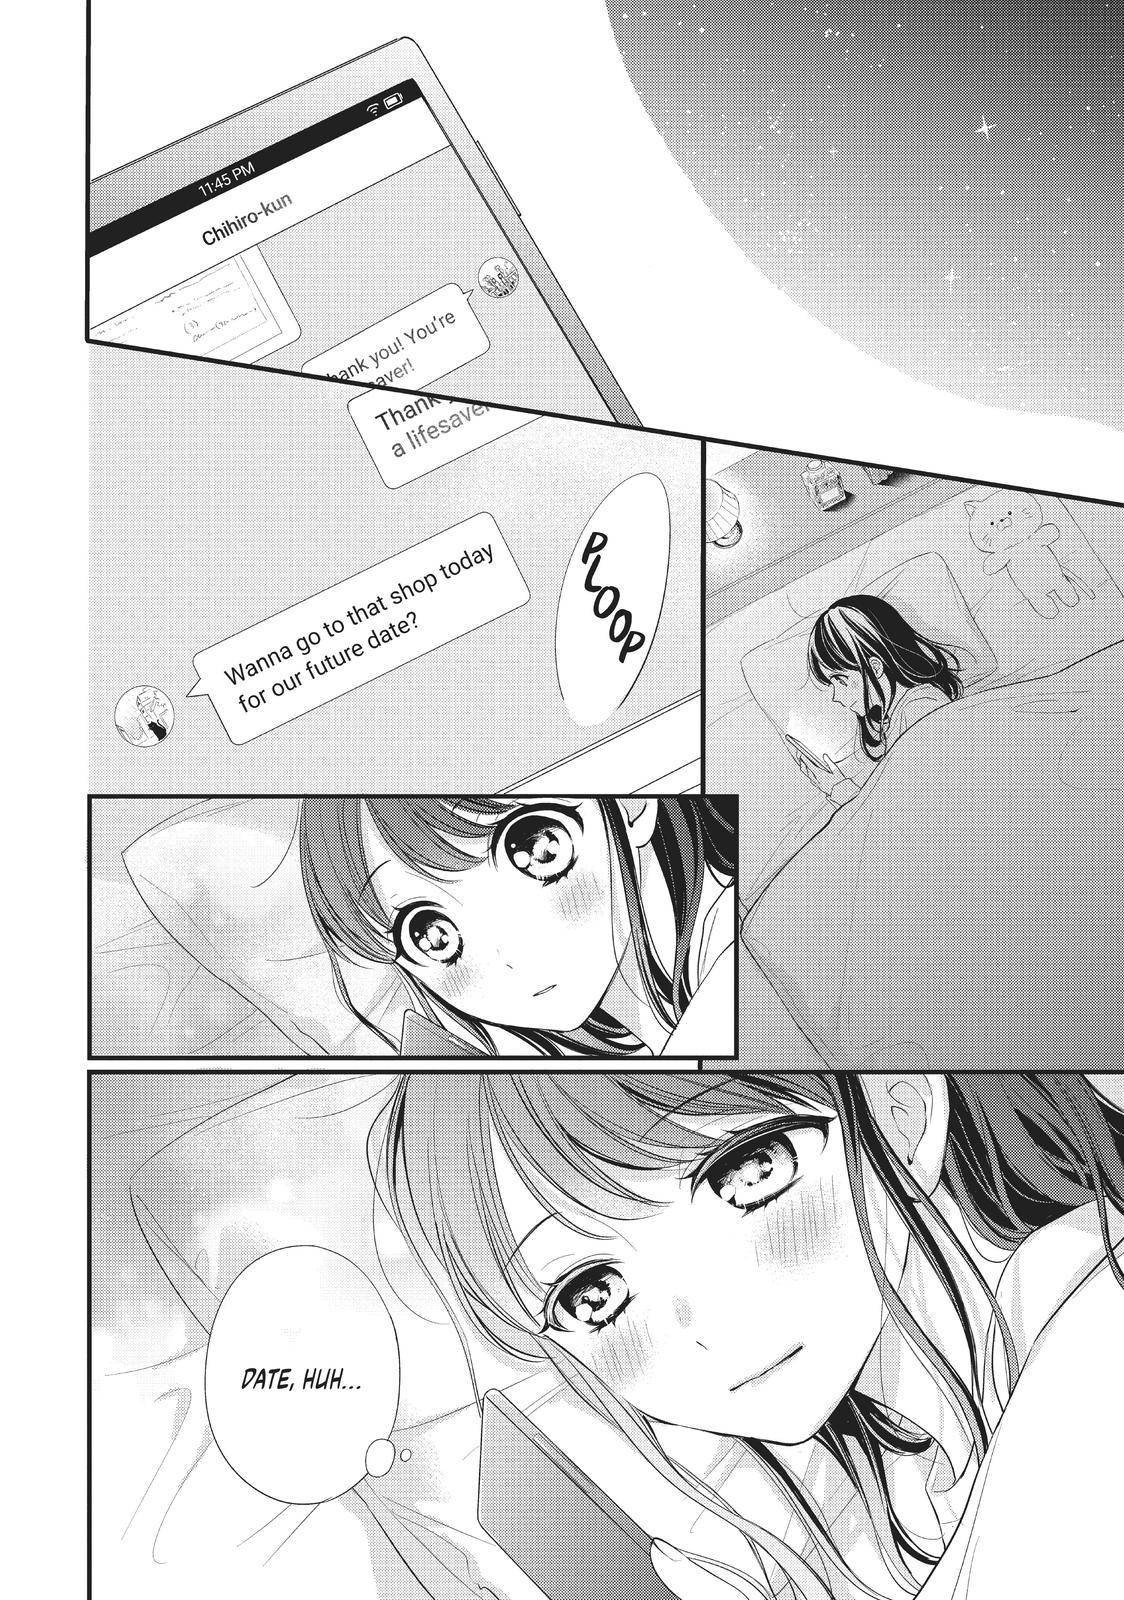 Chihiro-kun Only Has Eyes for Me - chapter 11 - #2